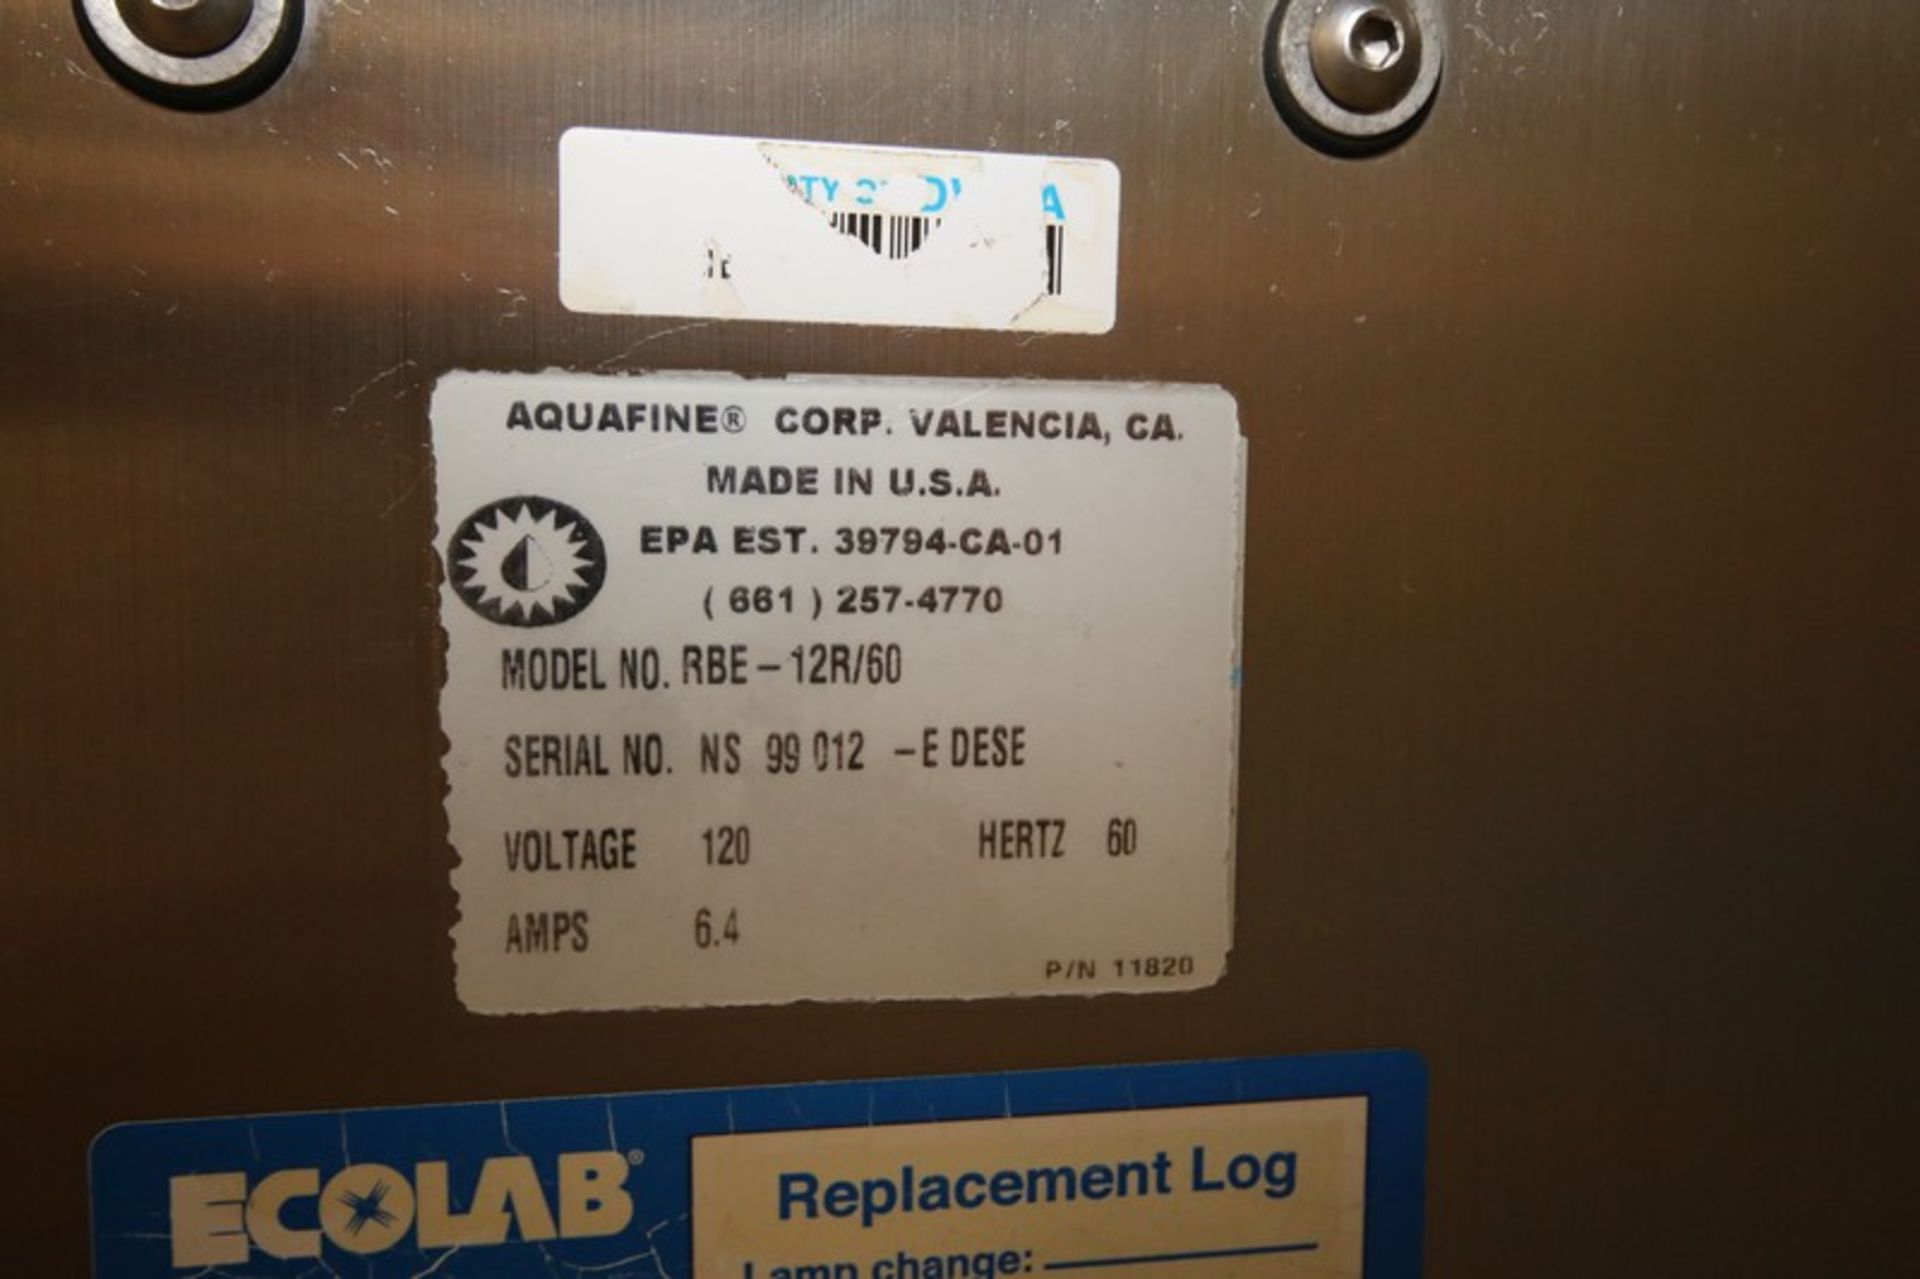 Aquafine S/S UV System, Model RBE - 12R/60, SN NS 99 012-EDESE, 120V,4" Flanged Connectors, with - Image 9 of 9